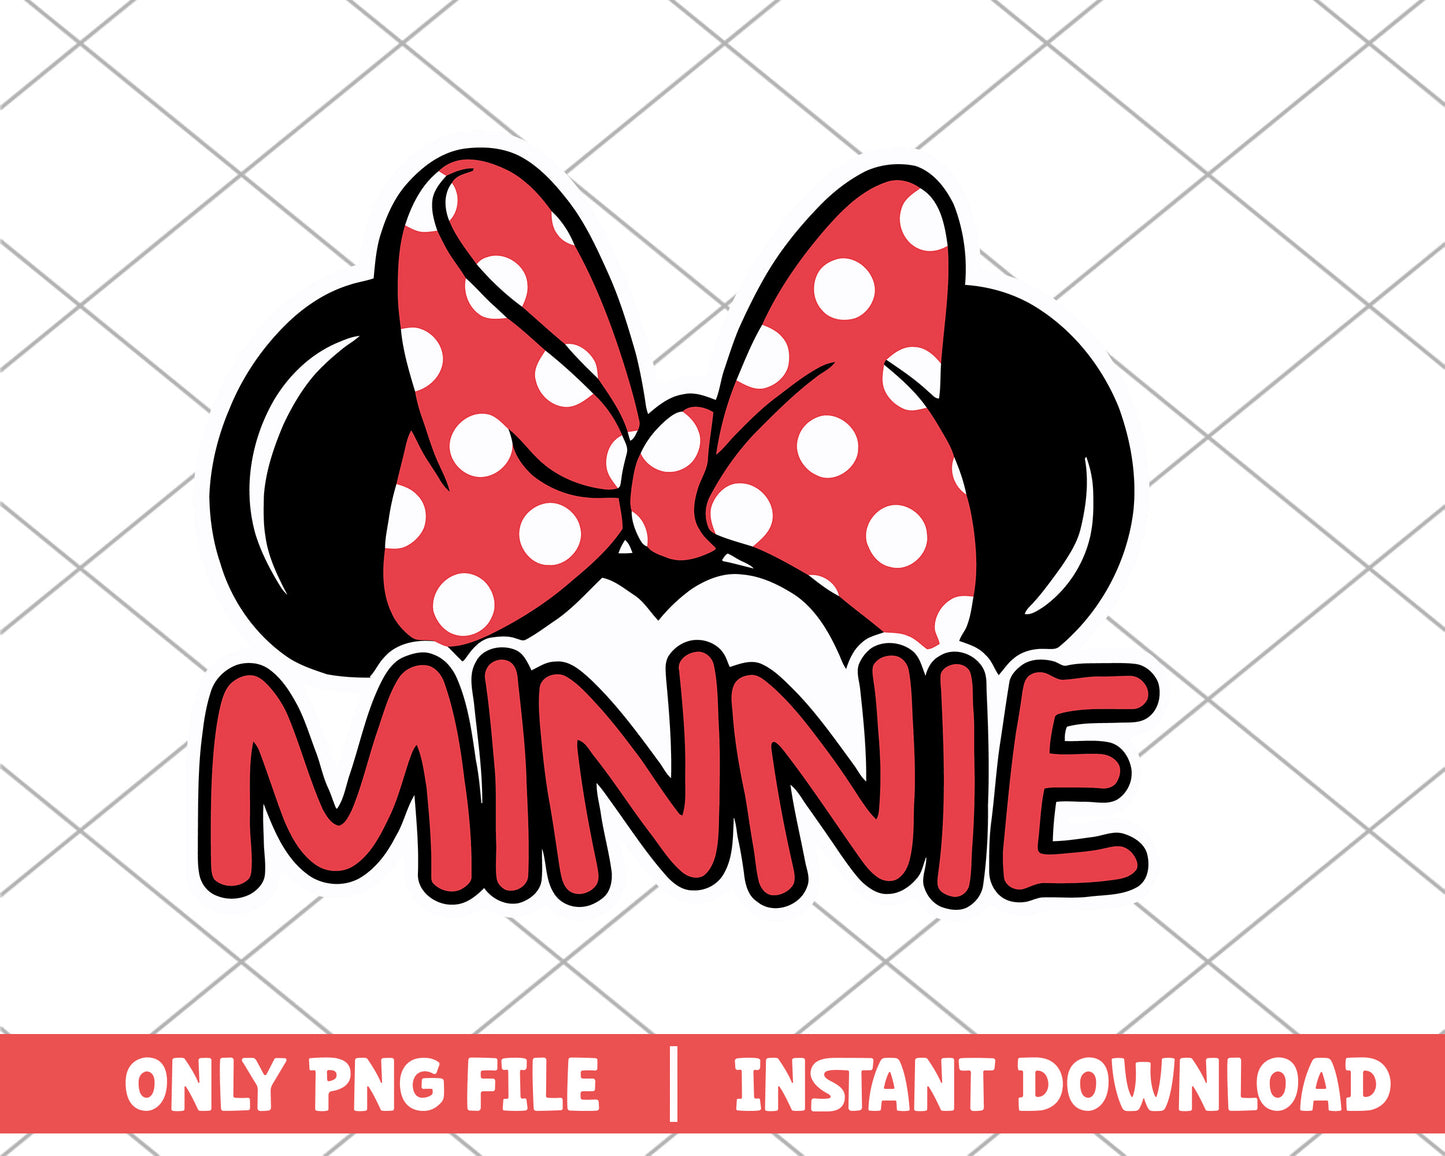 Minnie mouse red disney png